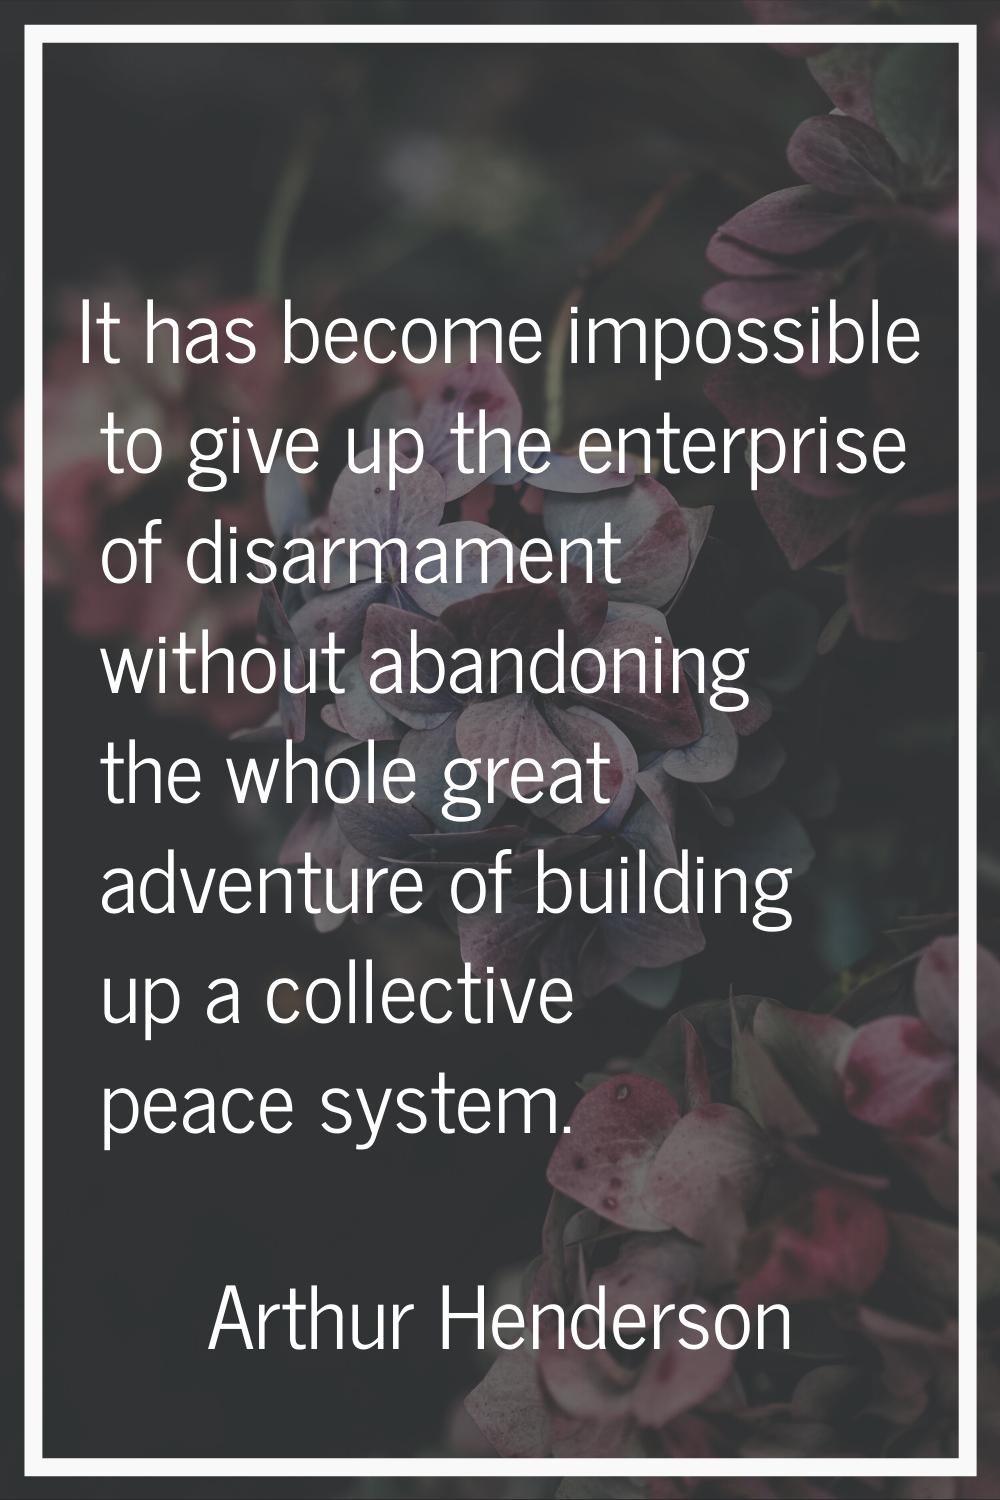 It has become impossible to give up the enterprise of disarmament without abandoning the whole grea